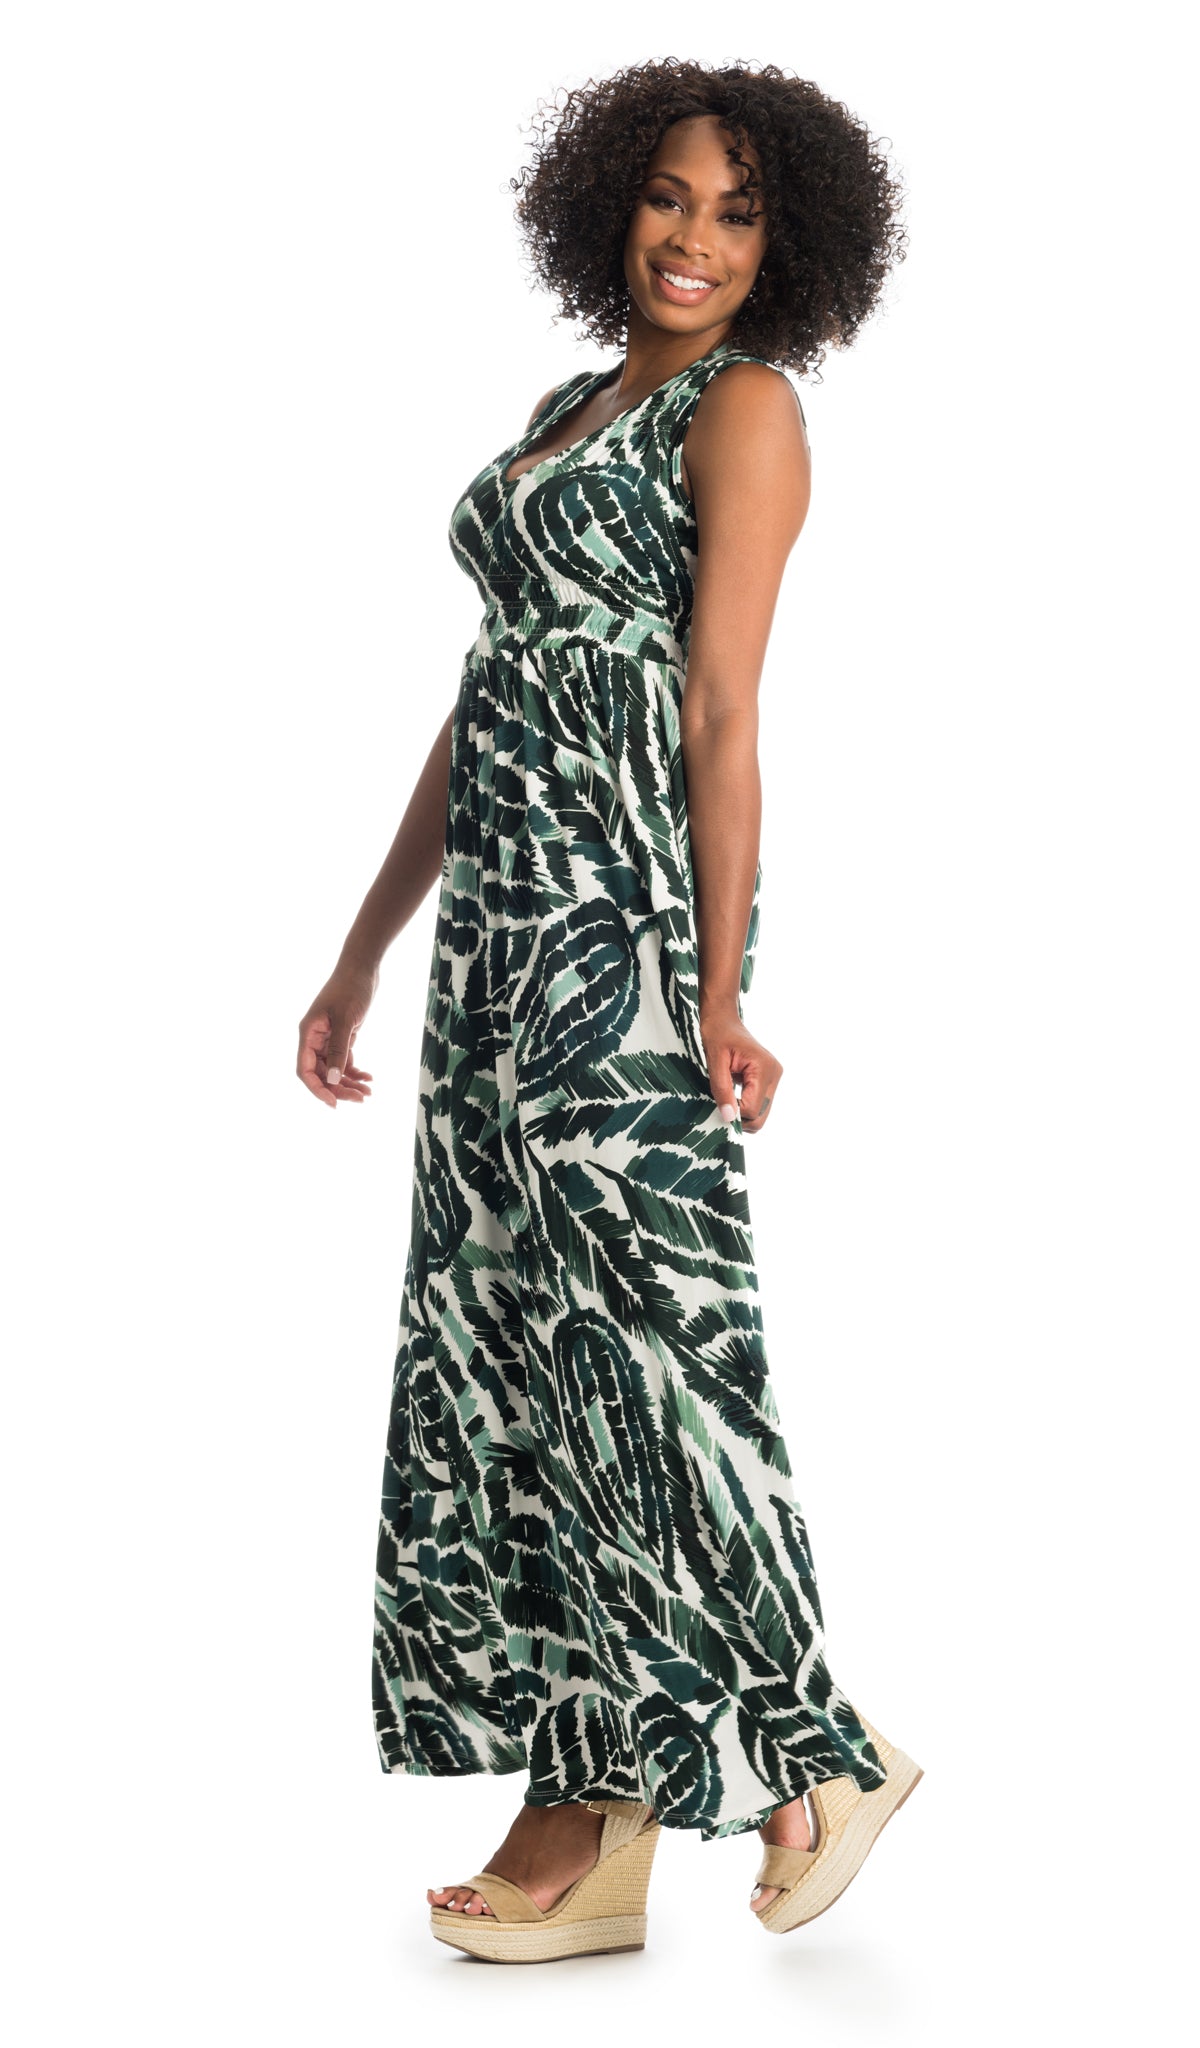 Palm Valeria dress worn as non-maternity style by woman holding side of dress with one hand.